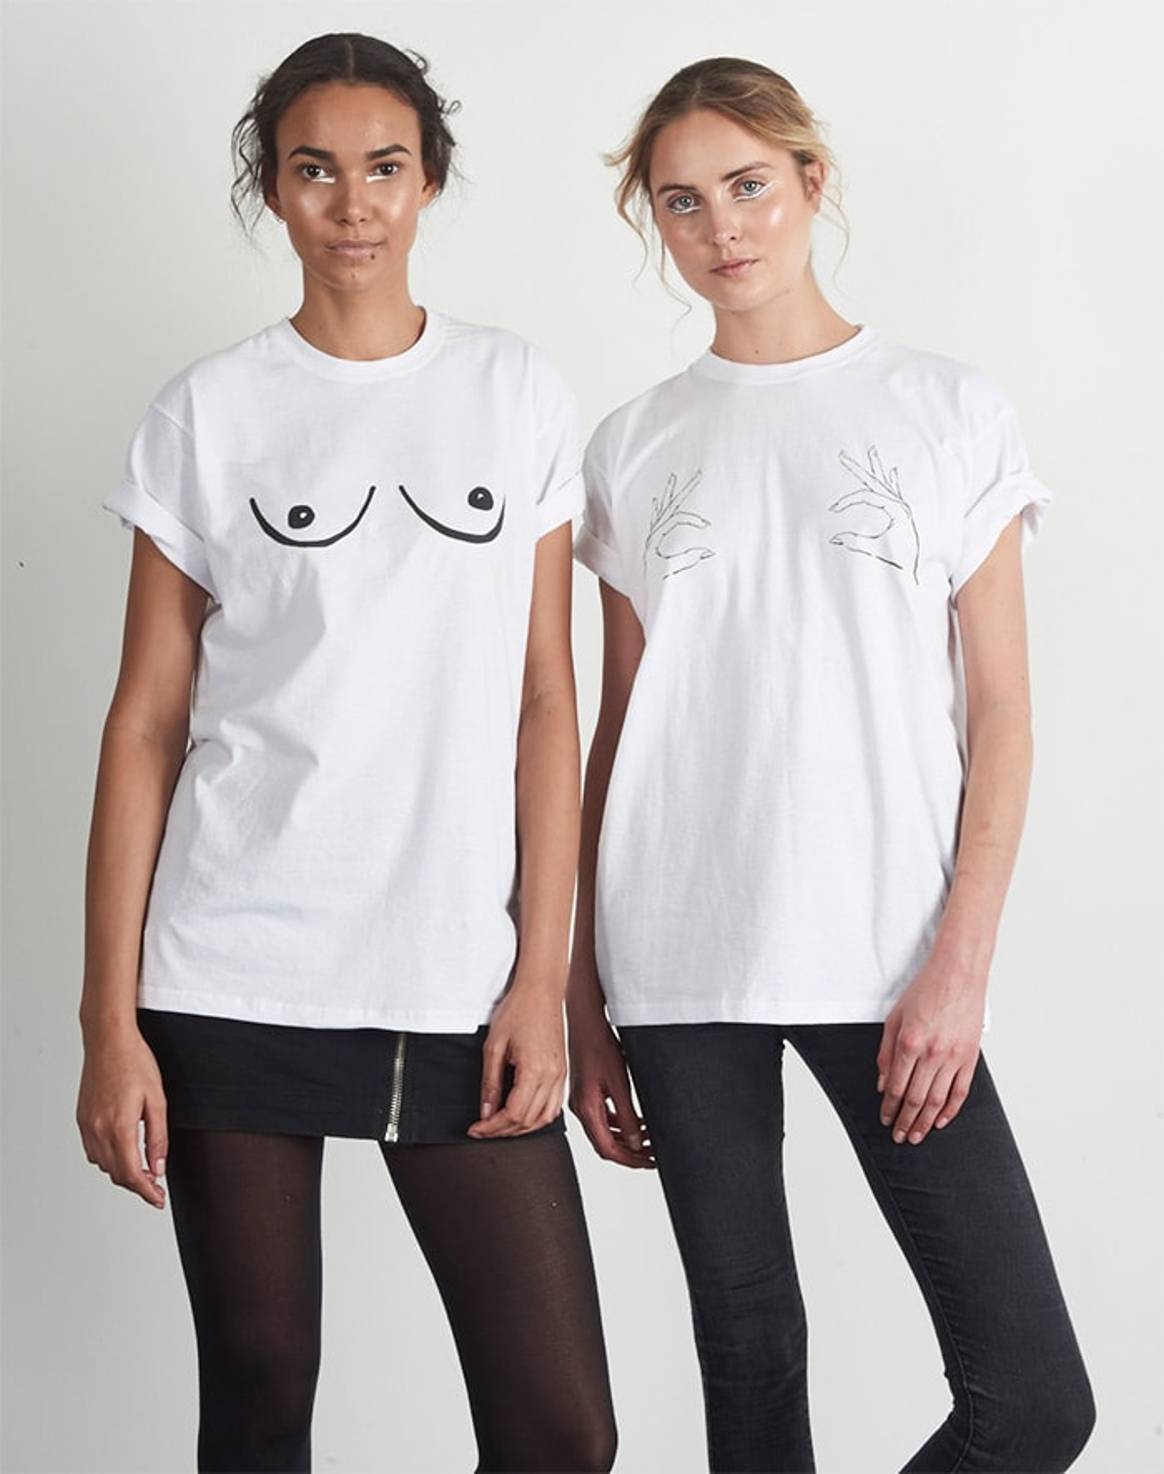 We Are Kin launches charity T-shirt